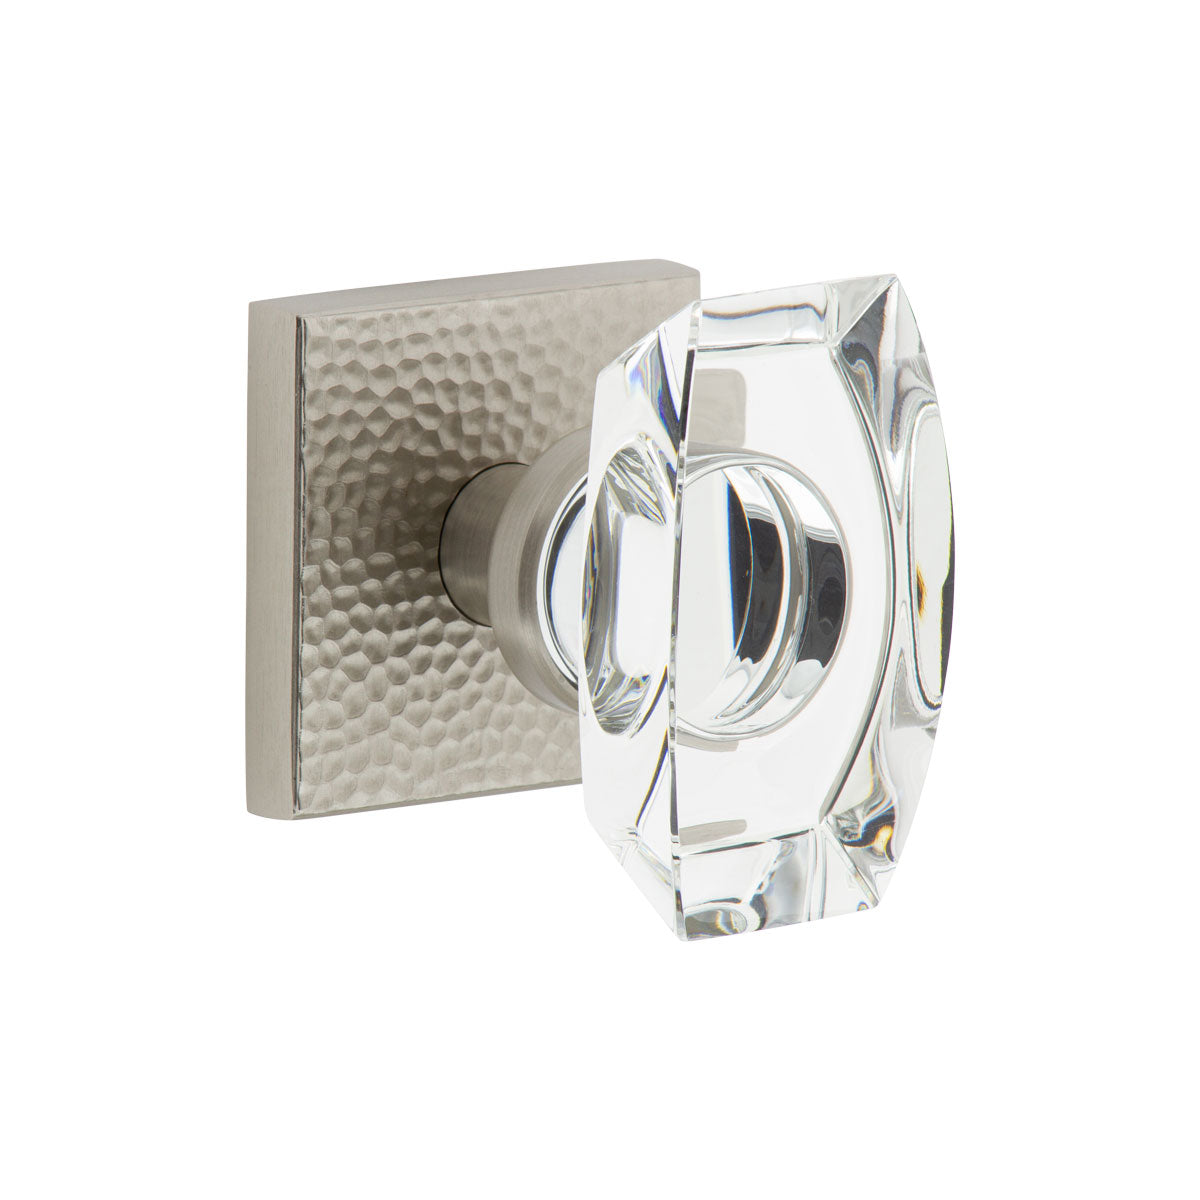 Quadrato Hammered Rosette with Stella Crystal Knob in Satin Nickel